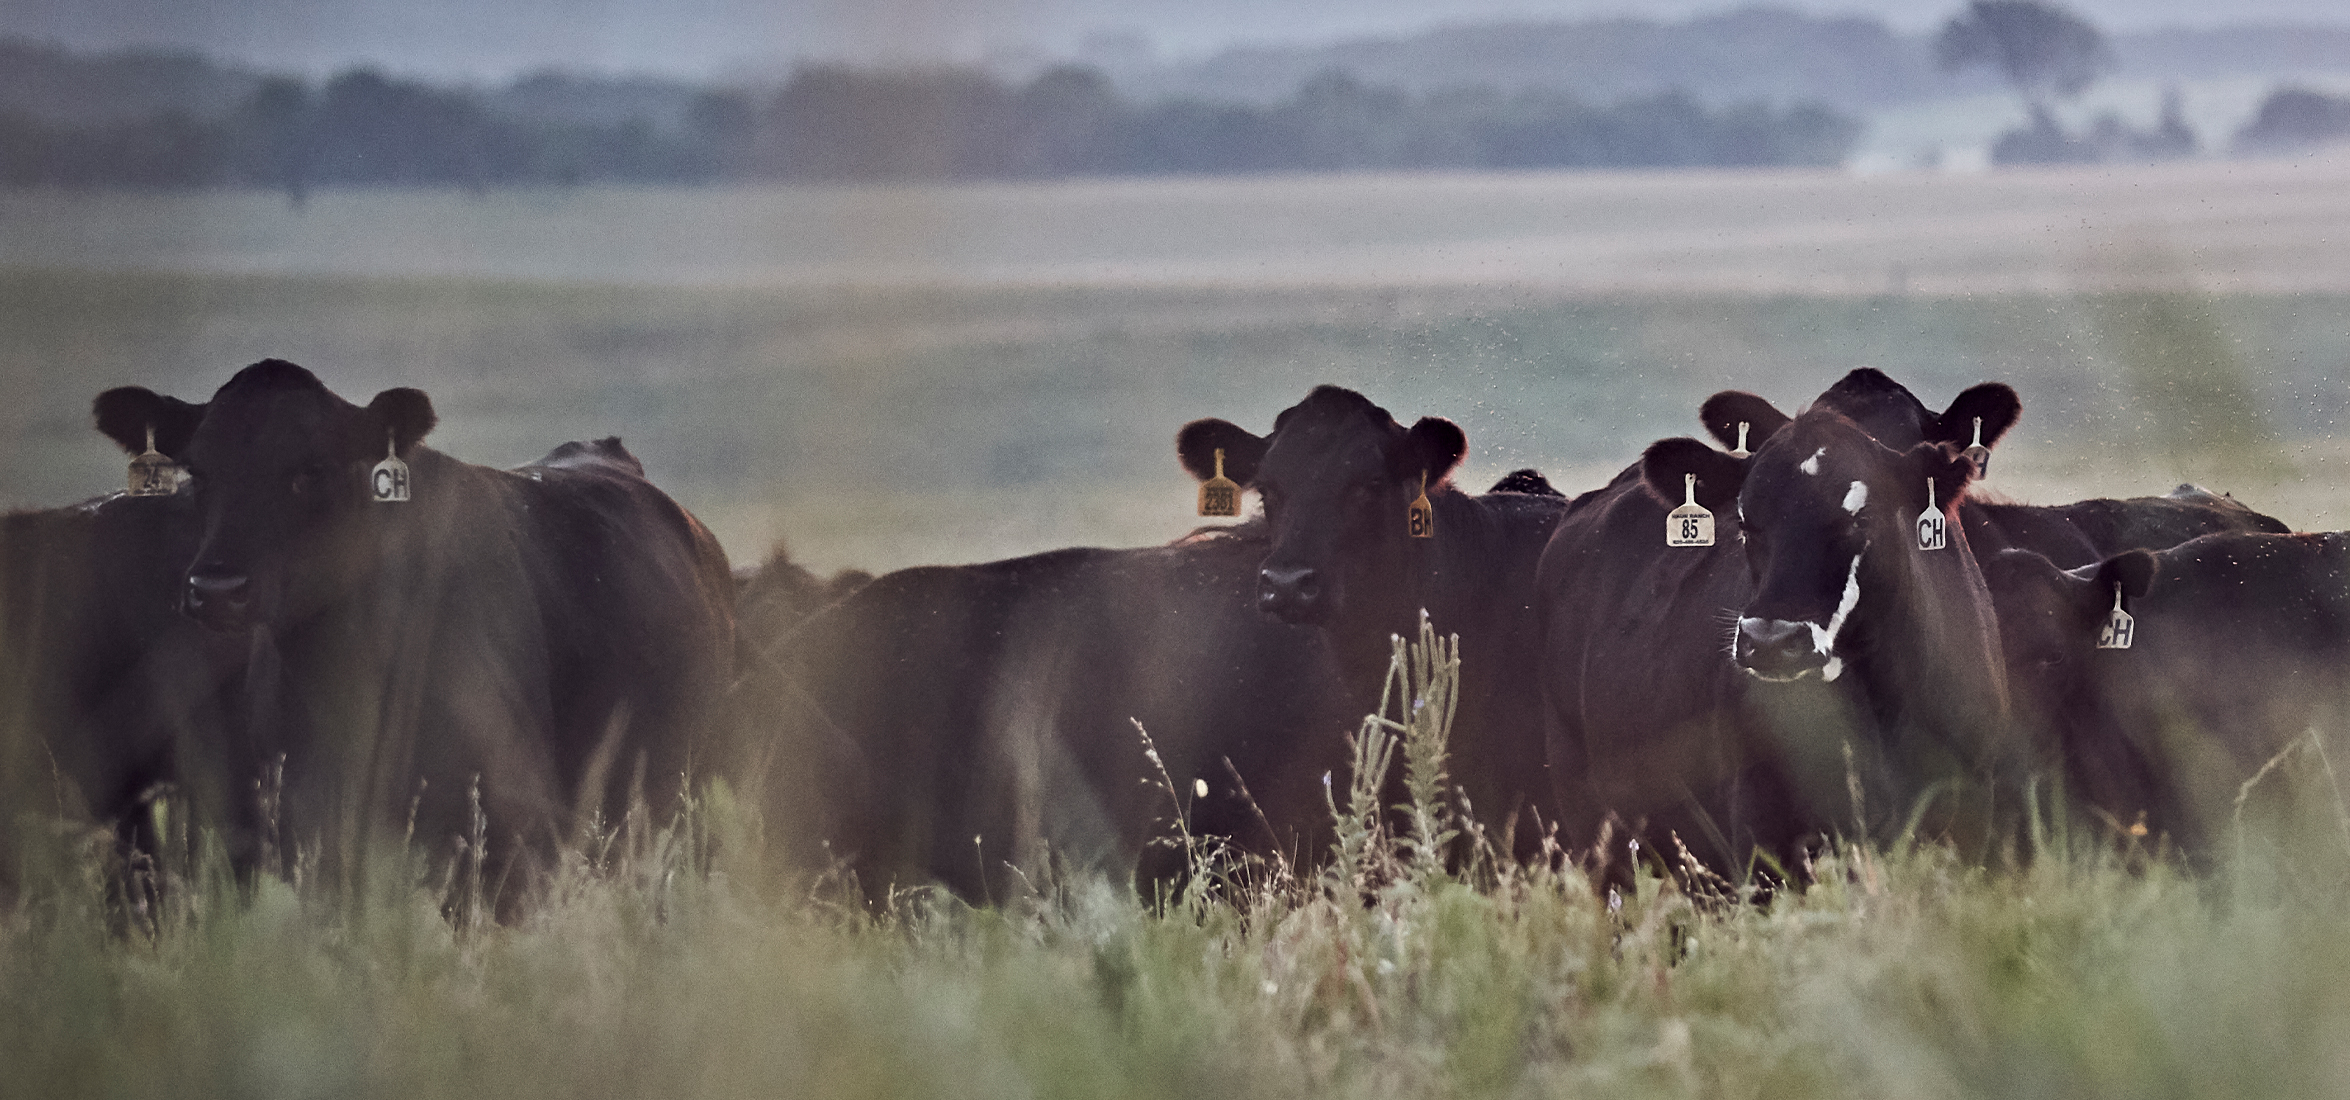 Beef cattle on pasture